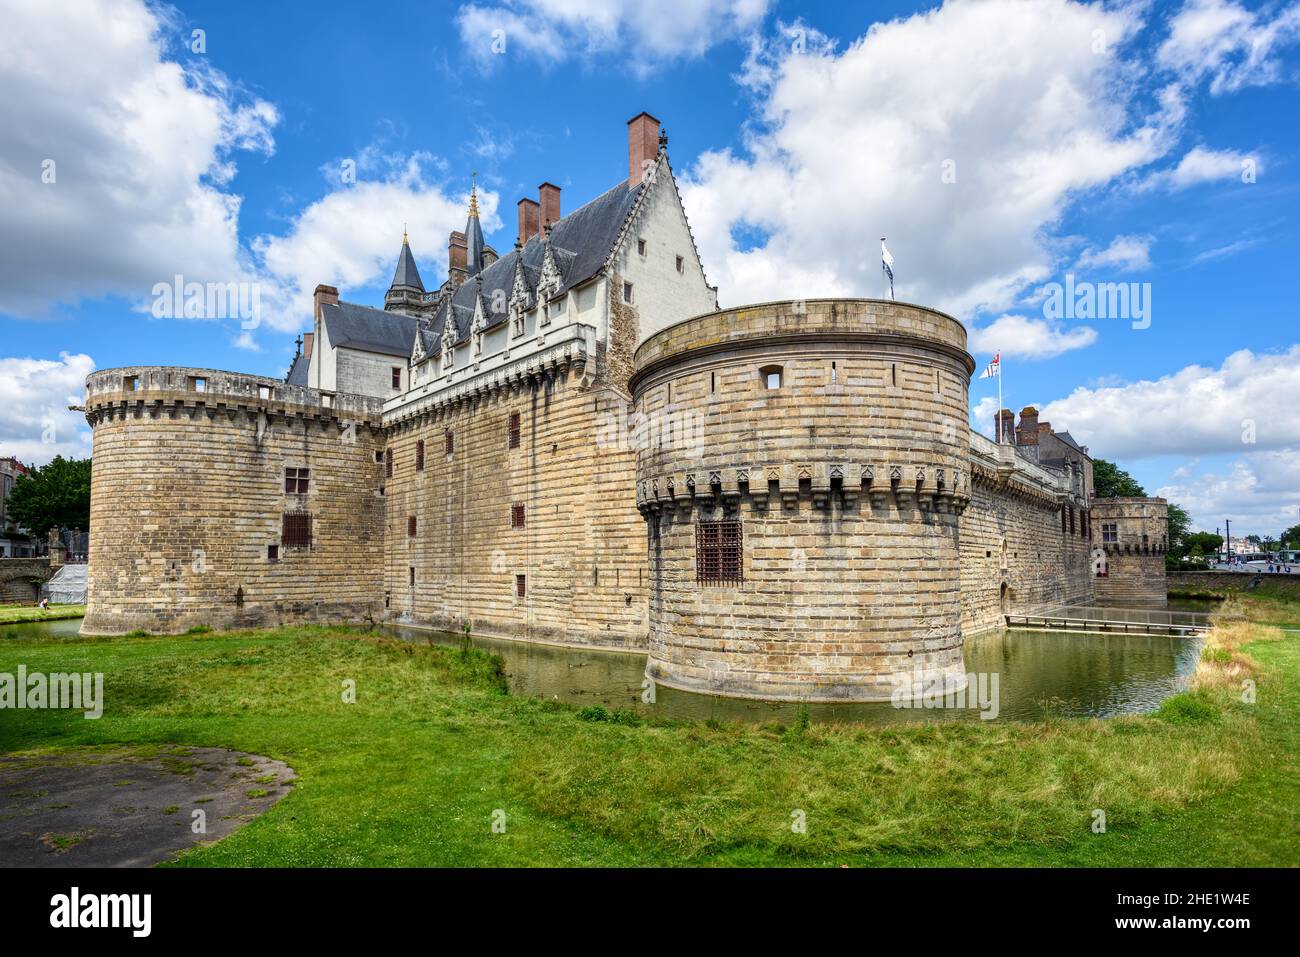 Historical Chateau of the Dukes of Brittany castle in Nantes, France Stock Photo